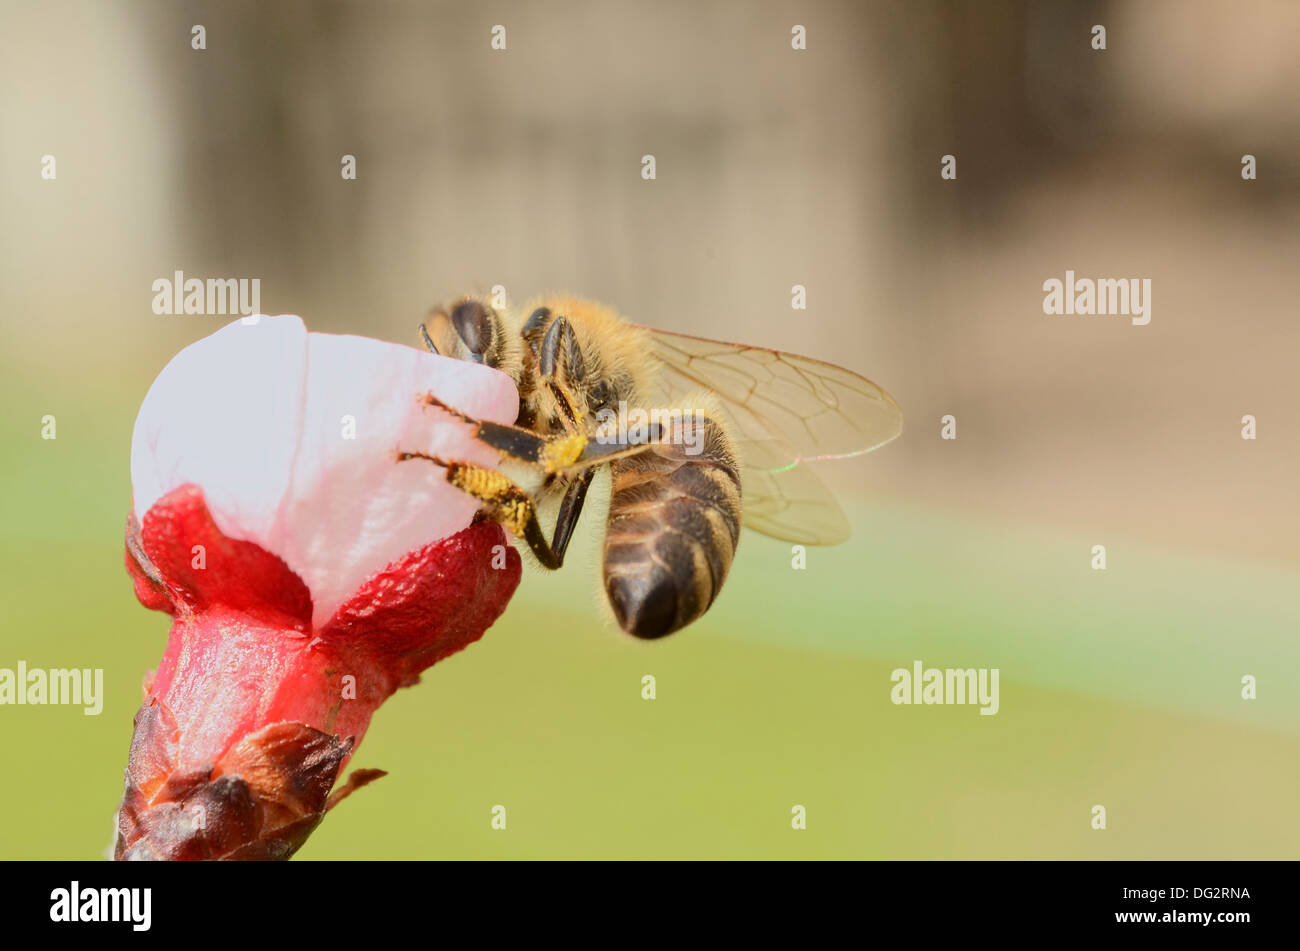 Busy Honey Bee Collecting Nectar From an Apple Blossom in the Springtime Stock Photo